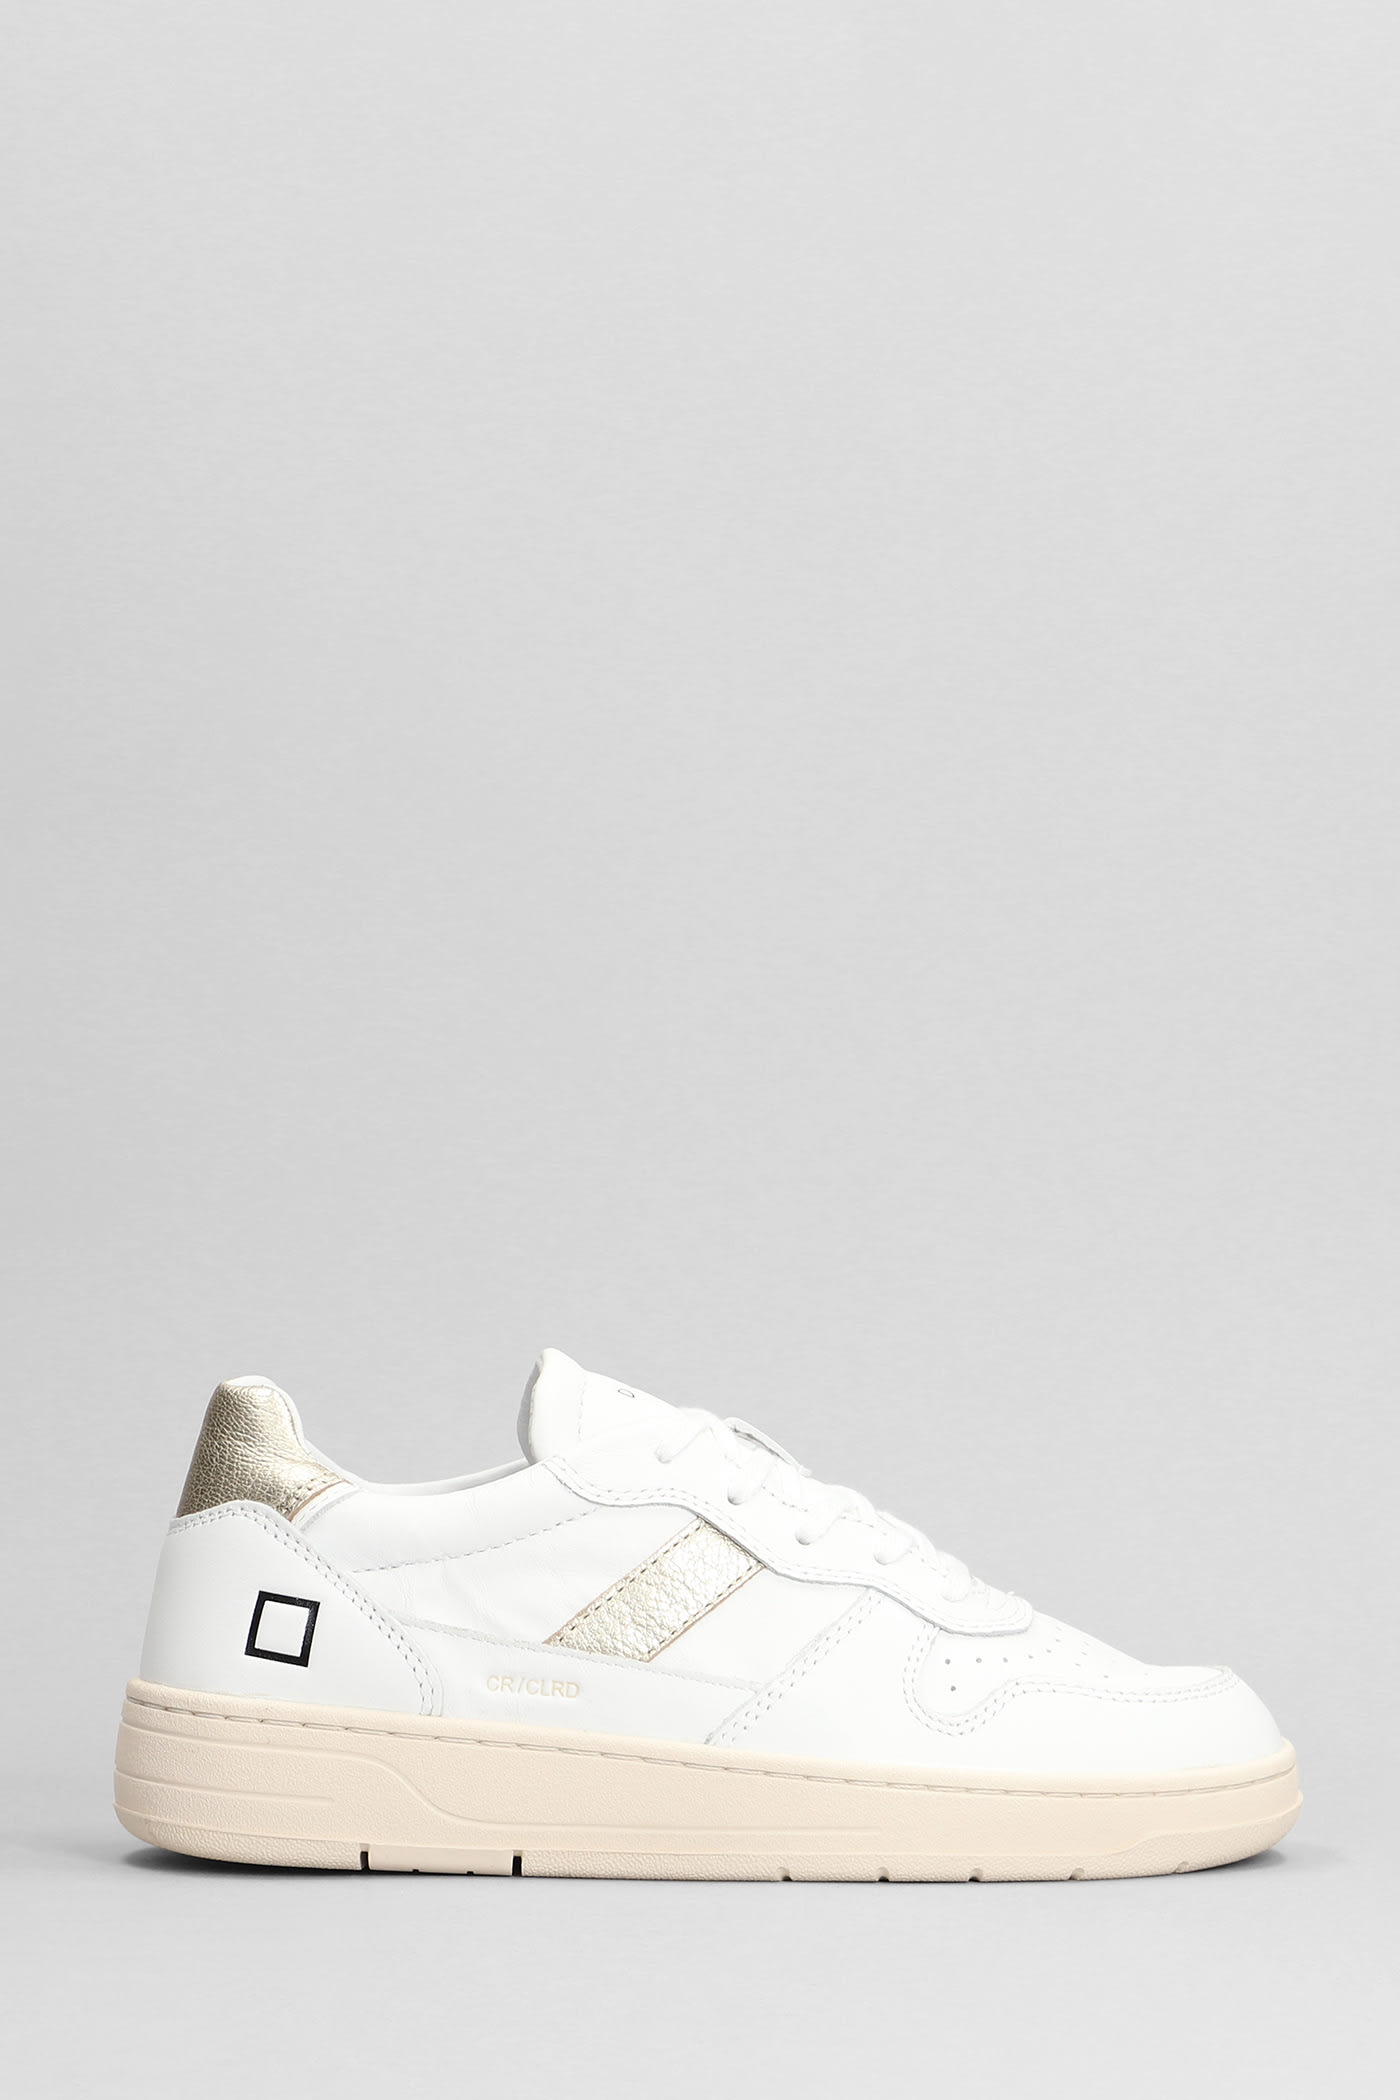 DATE COURT 2.0 SNEAKERS IN WHITE LEATHER